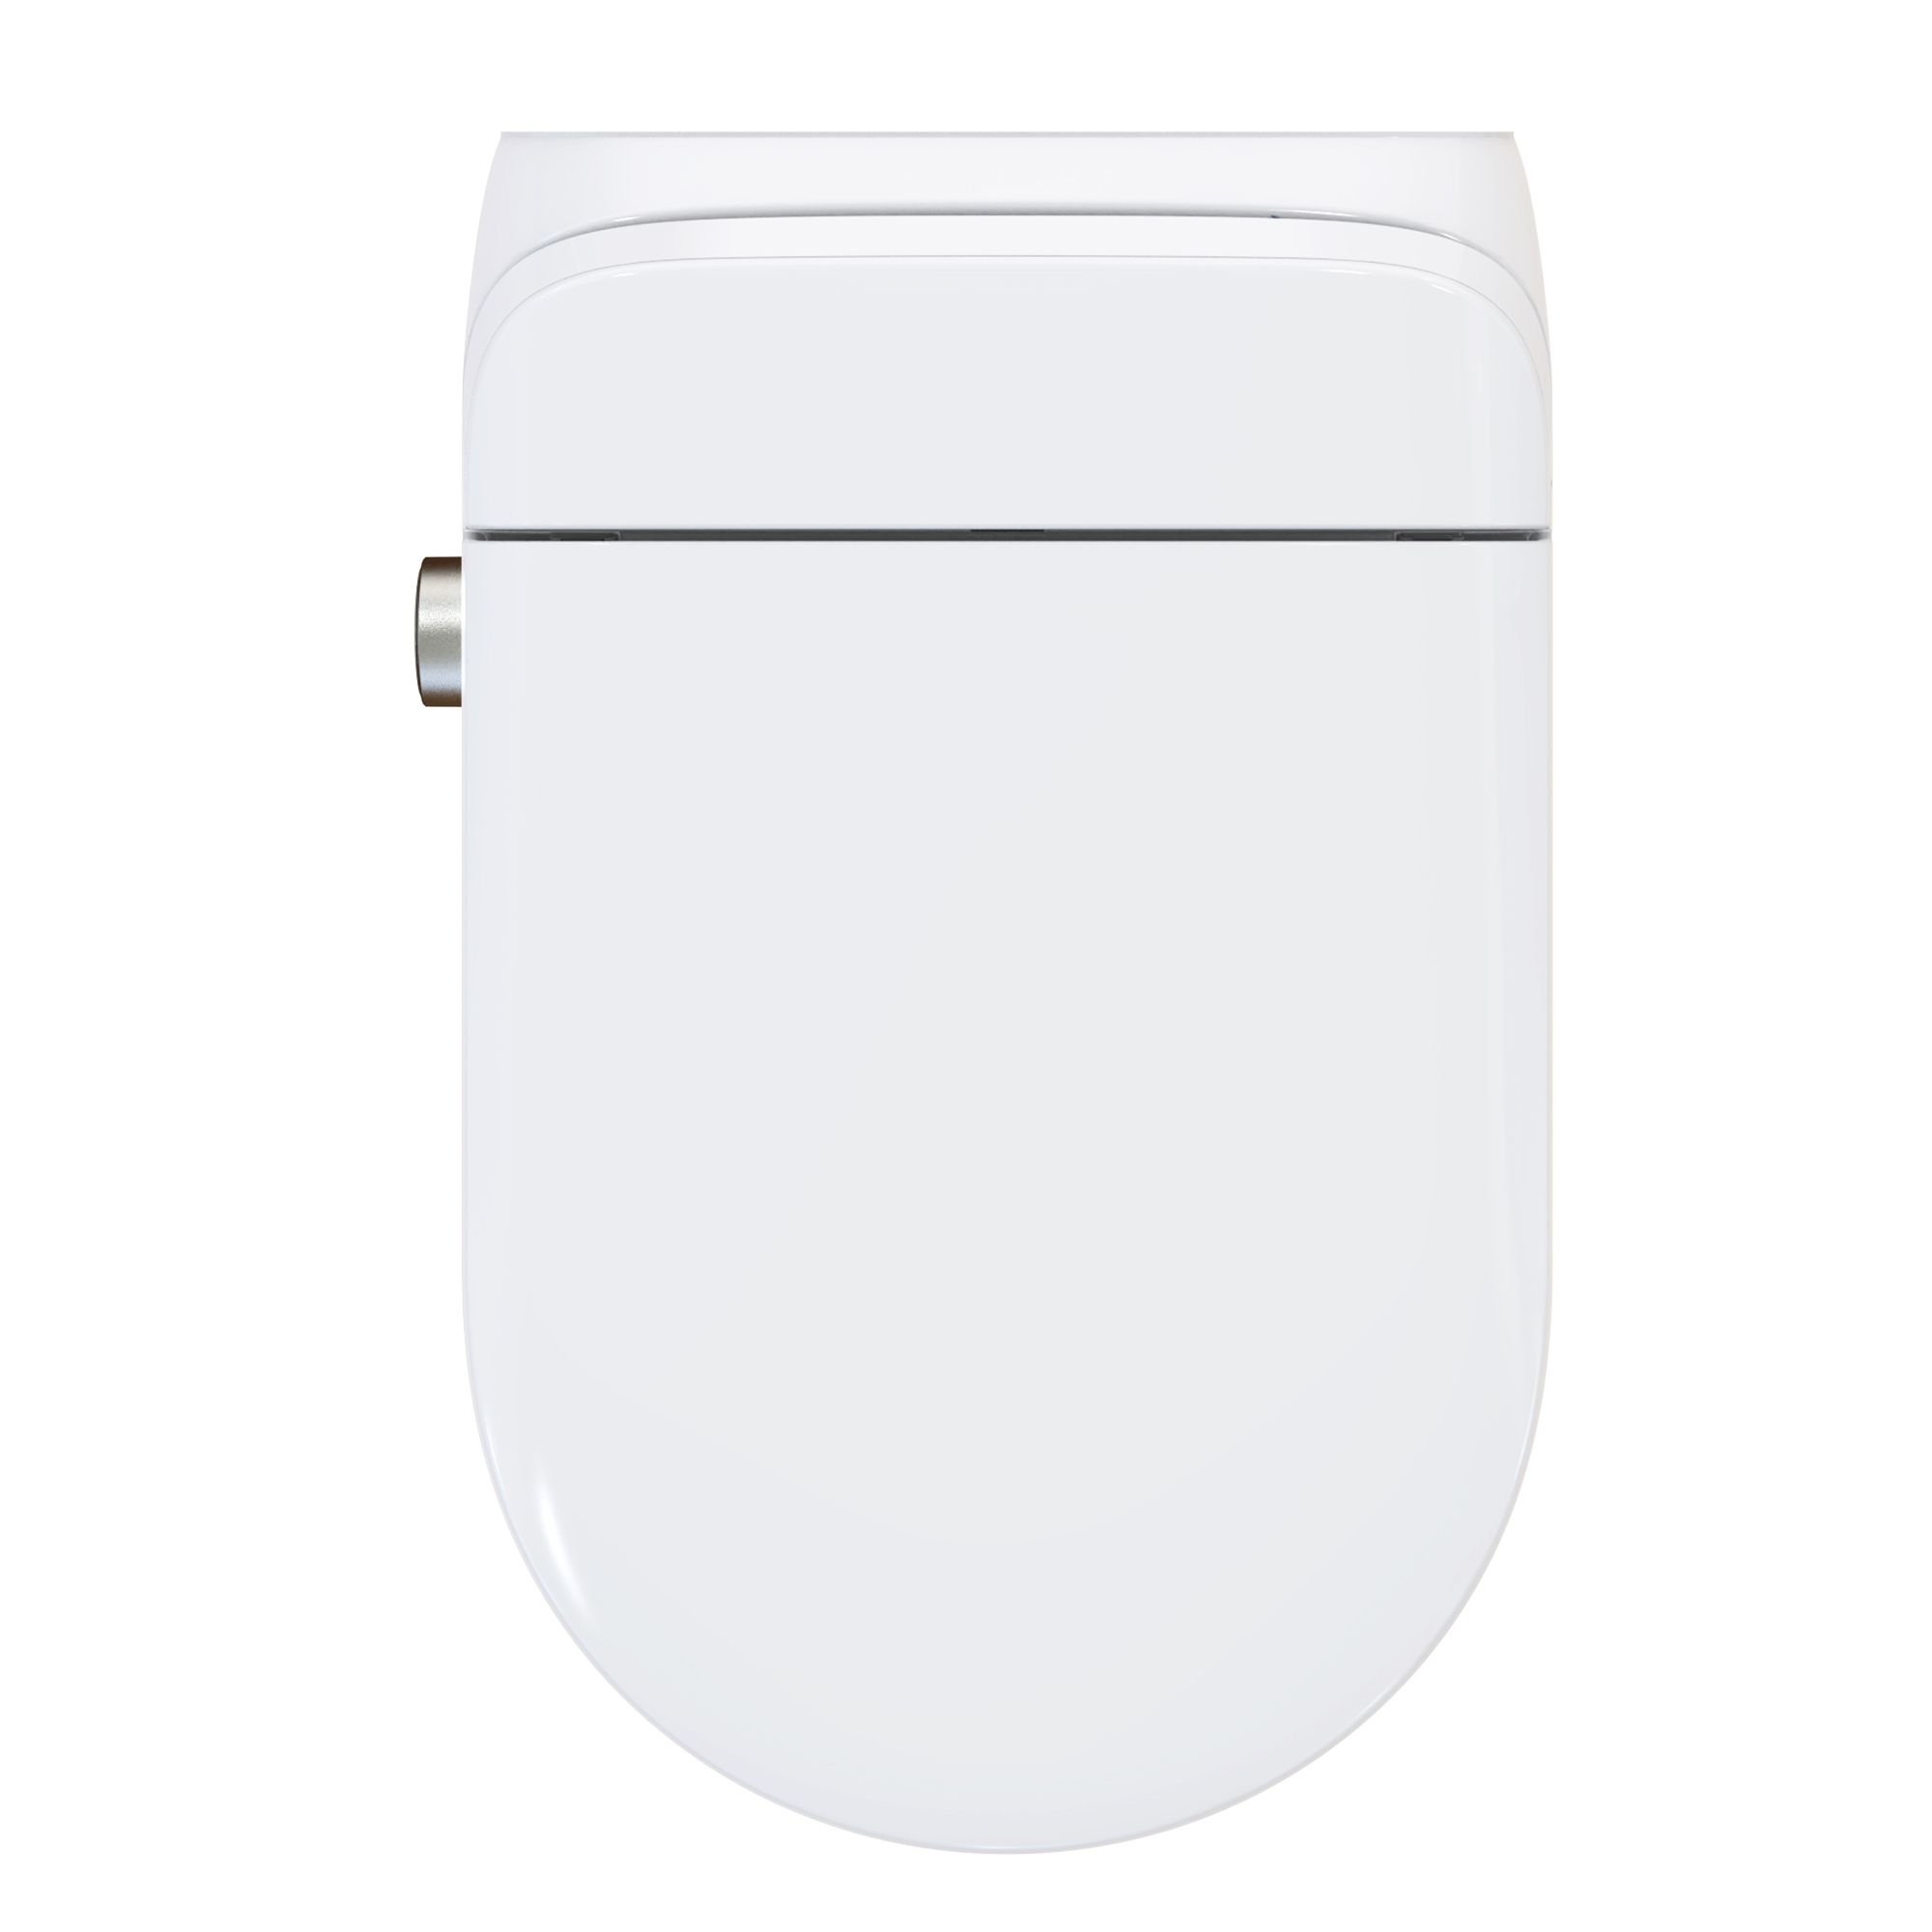 Bemis Pure Clean® 5000 Wall Hung Smart Toilet with Bidet Wash functions